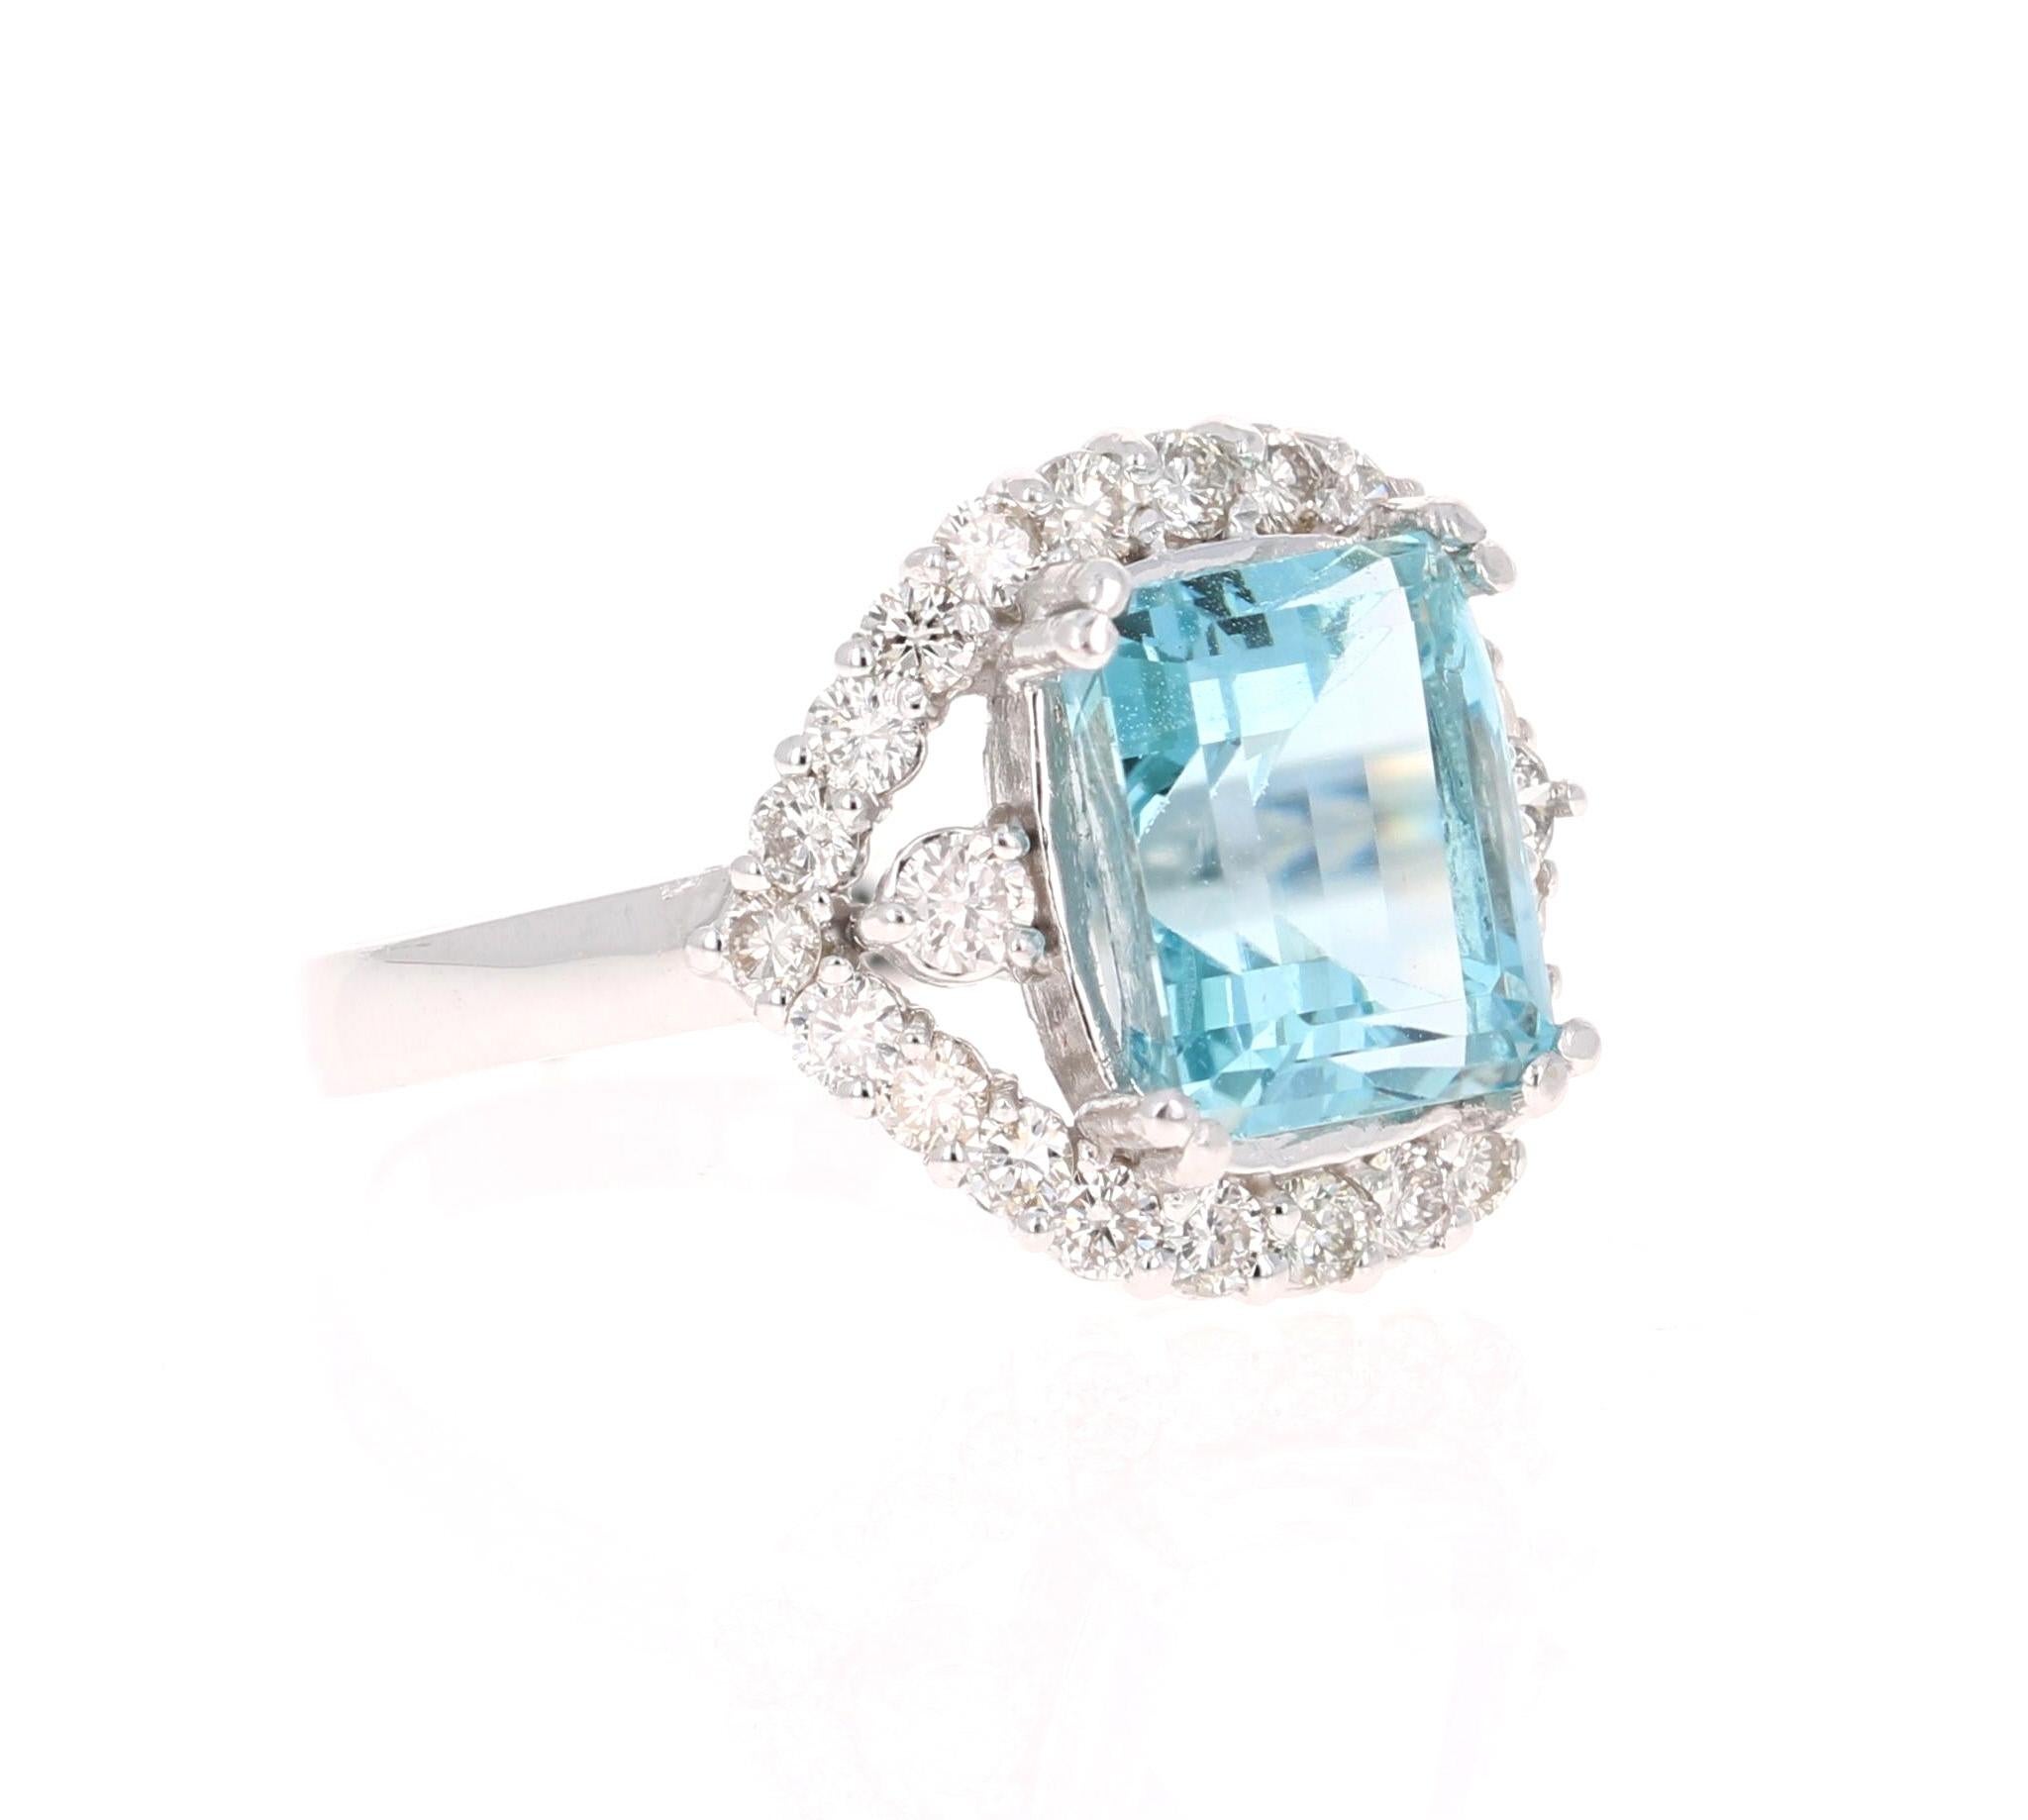 
This ring has a beautiful 3.87 Carat Emerald Cut Aquamarine set in the center of the ring and is surrounded by 24 Round Cut Diamonds that weigh 0.82 Carats (Clarity: VS2, Color: H). The total carat weight of this ring is 4.69 Carats. 
The